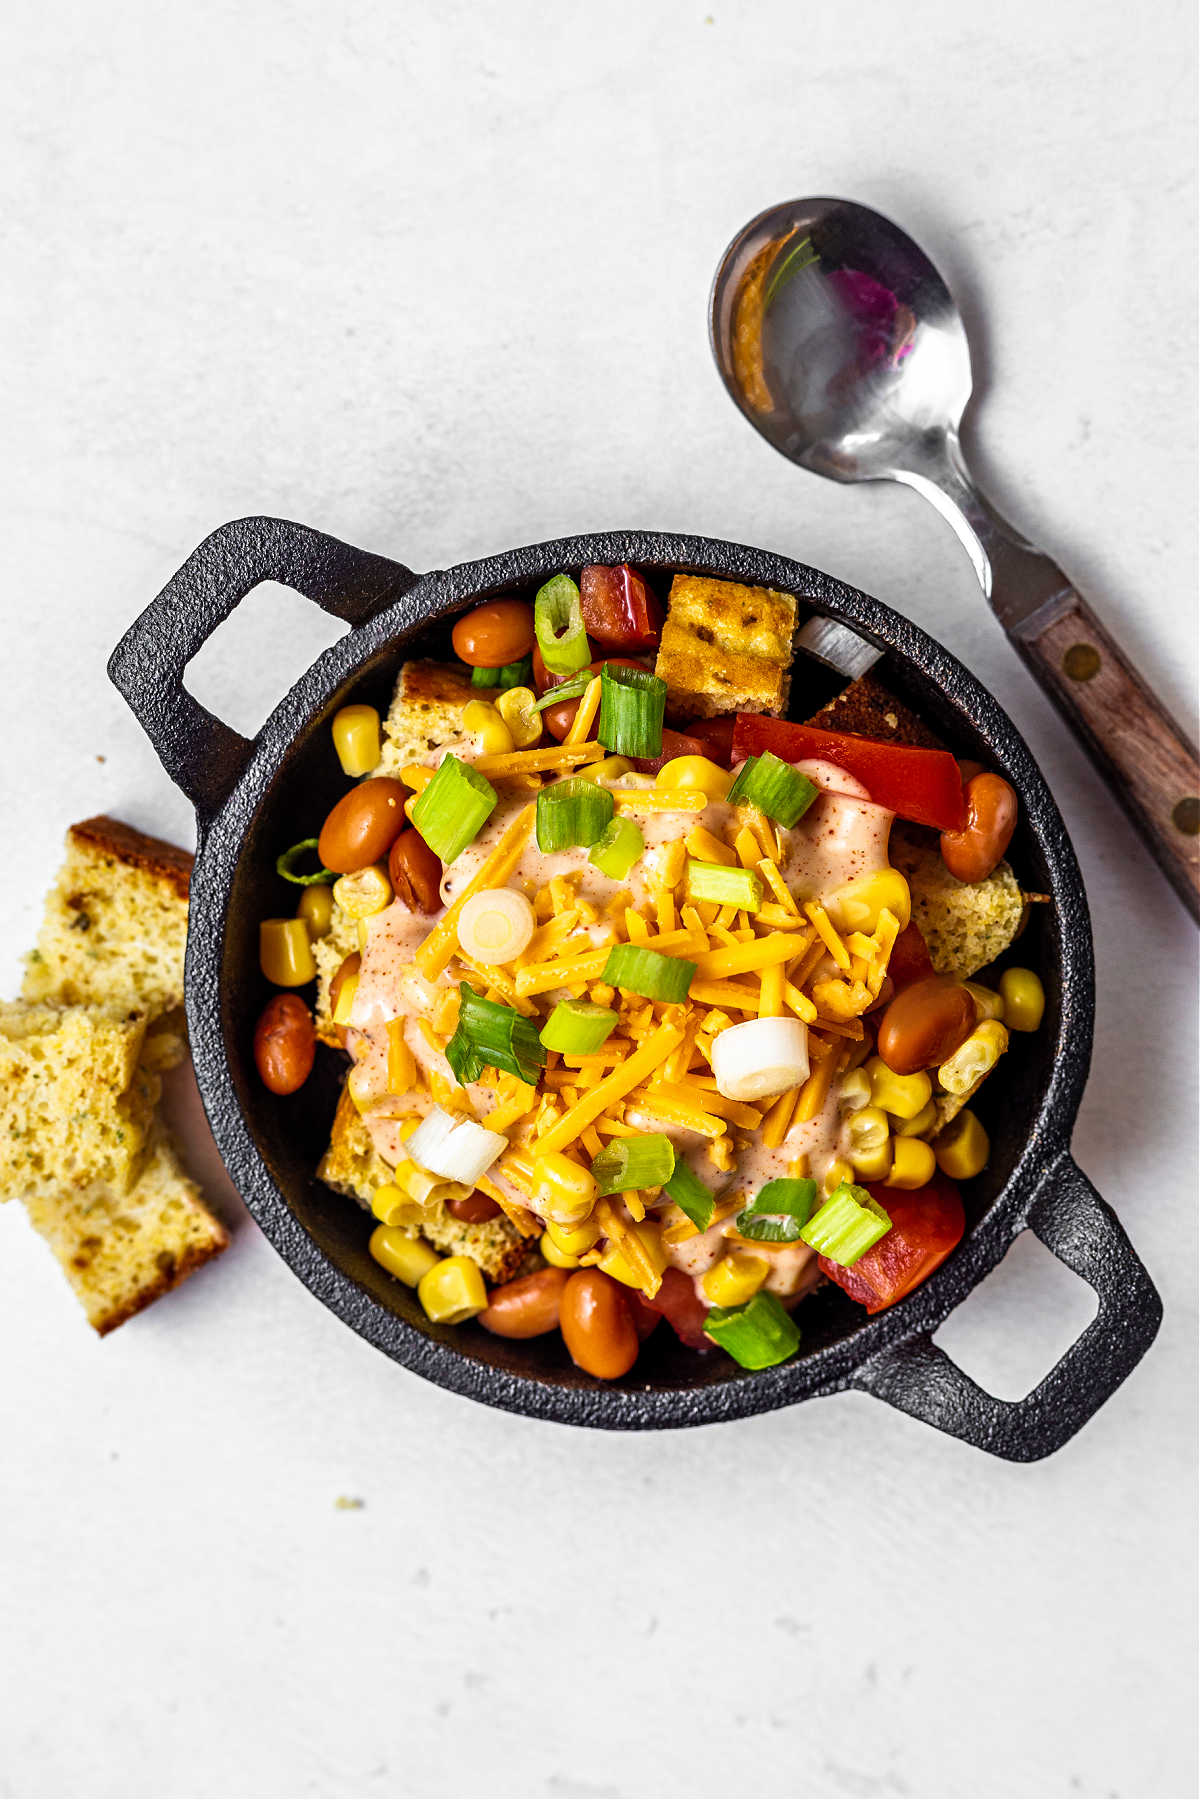 a serving of cornbread salad in a mini cast iron skilled with a spoon and yellow napkin on a table.